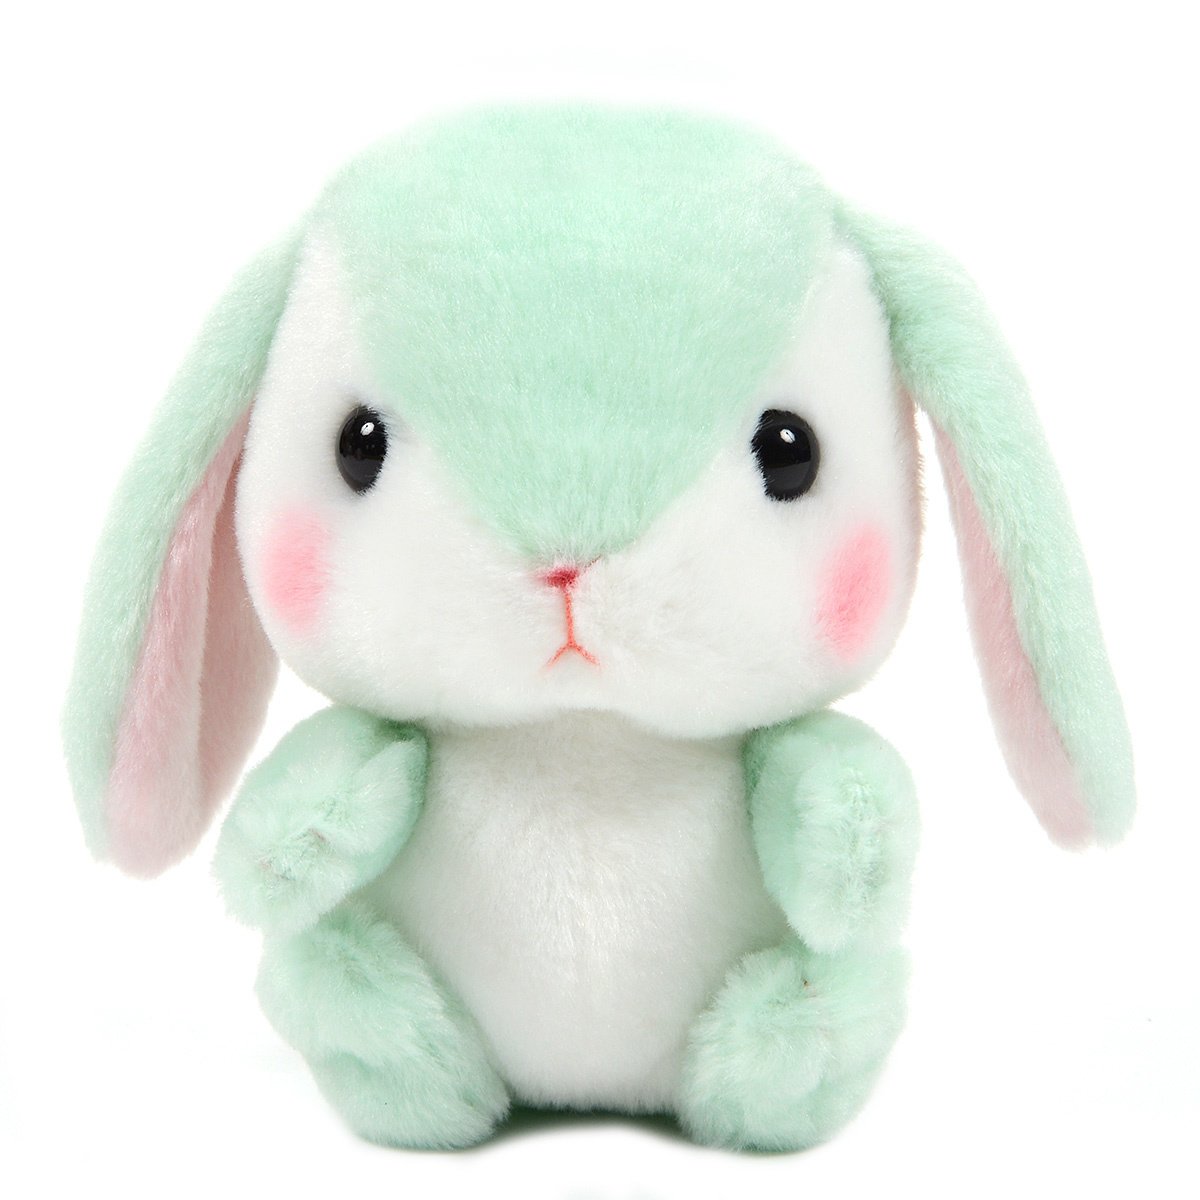 Amuse Bunny Plushie Cute Stuffed Animal Toy Green / White 6 Inches